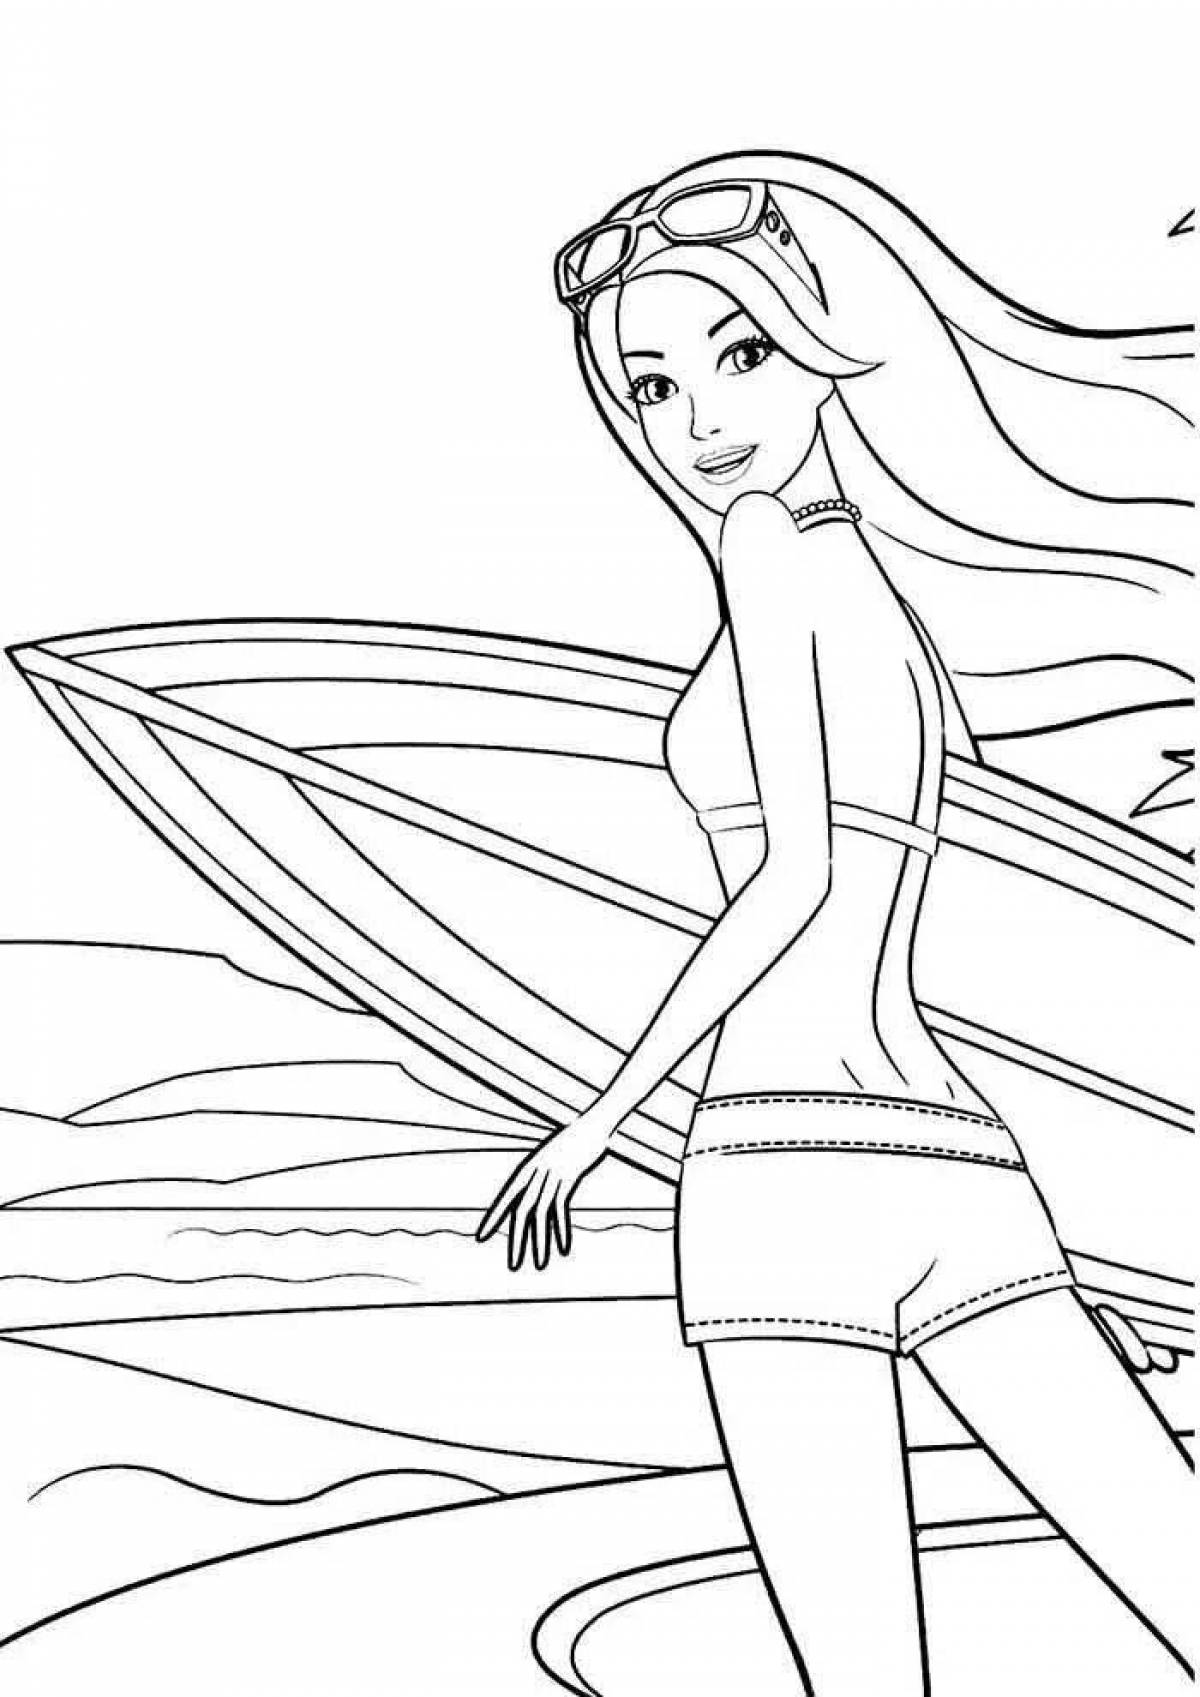 Coloring page amazing barbie in swimsuit